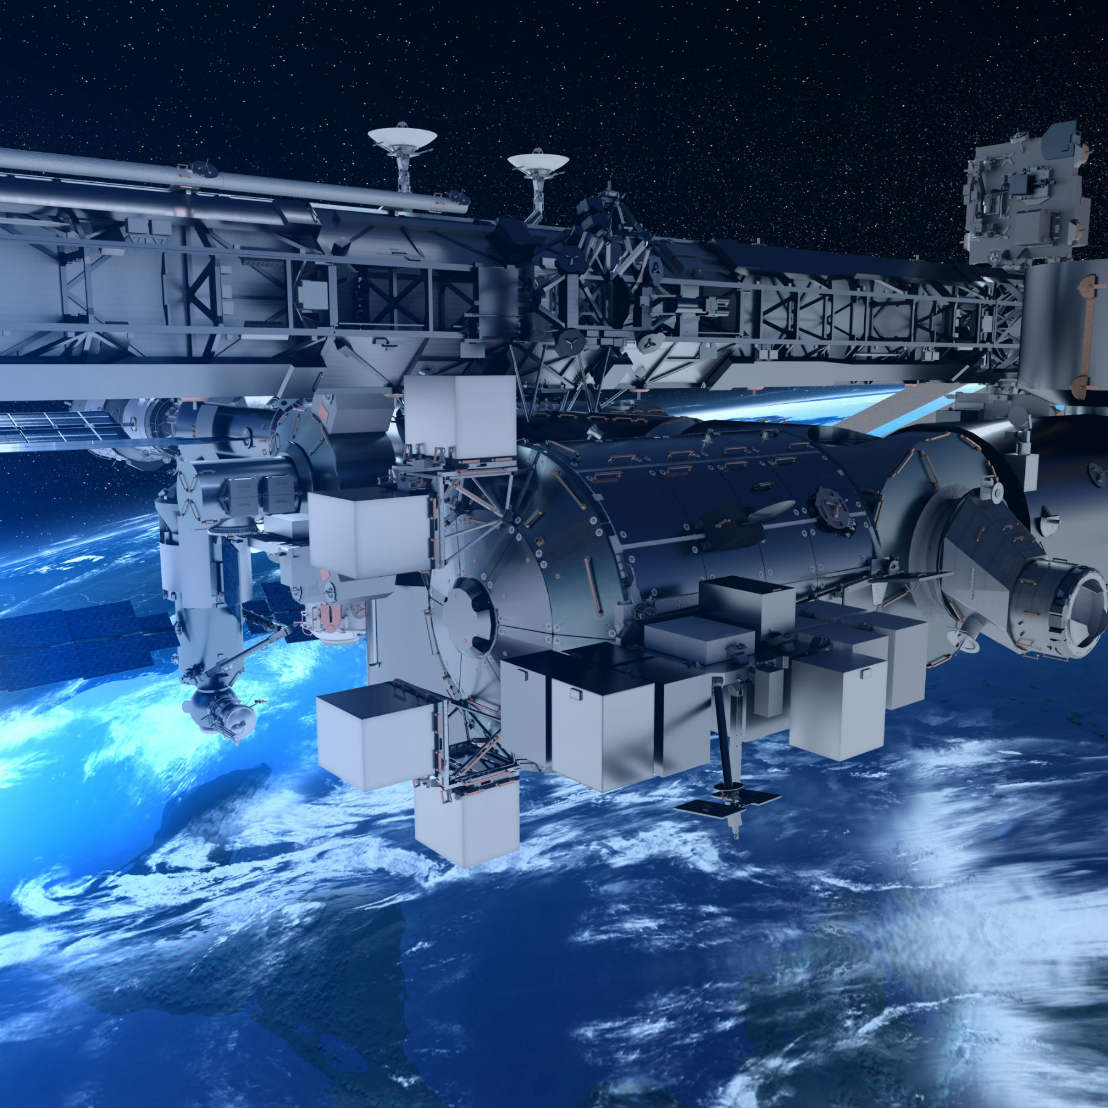 Bartolomeo aims to attract new users to ISS